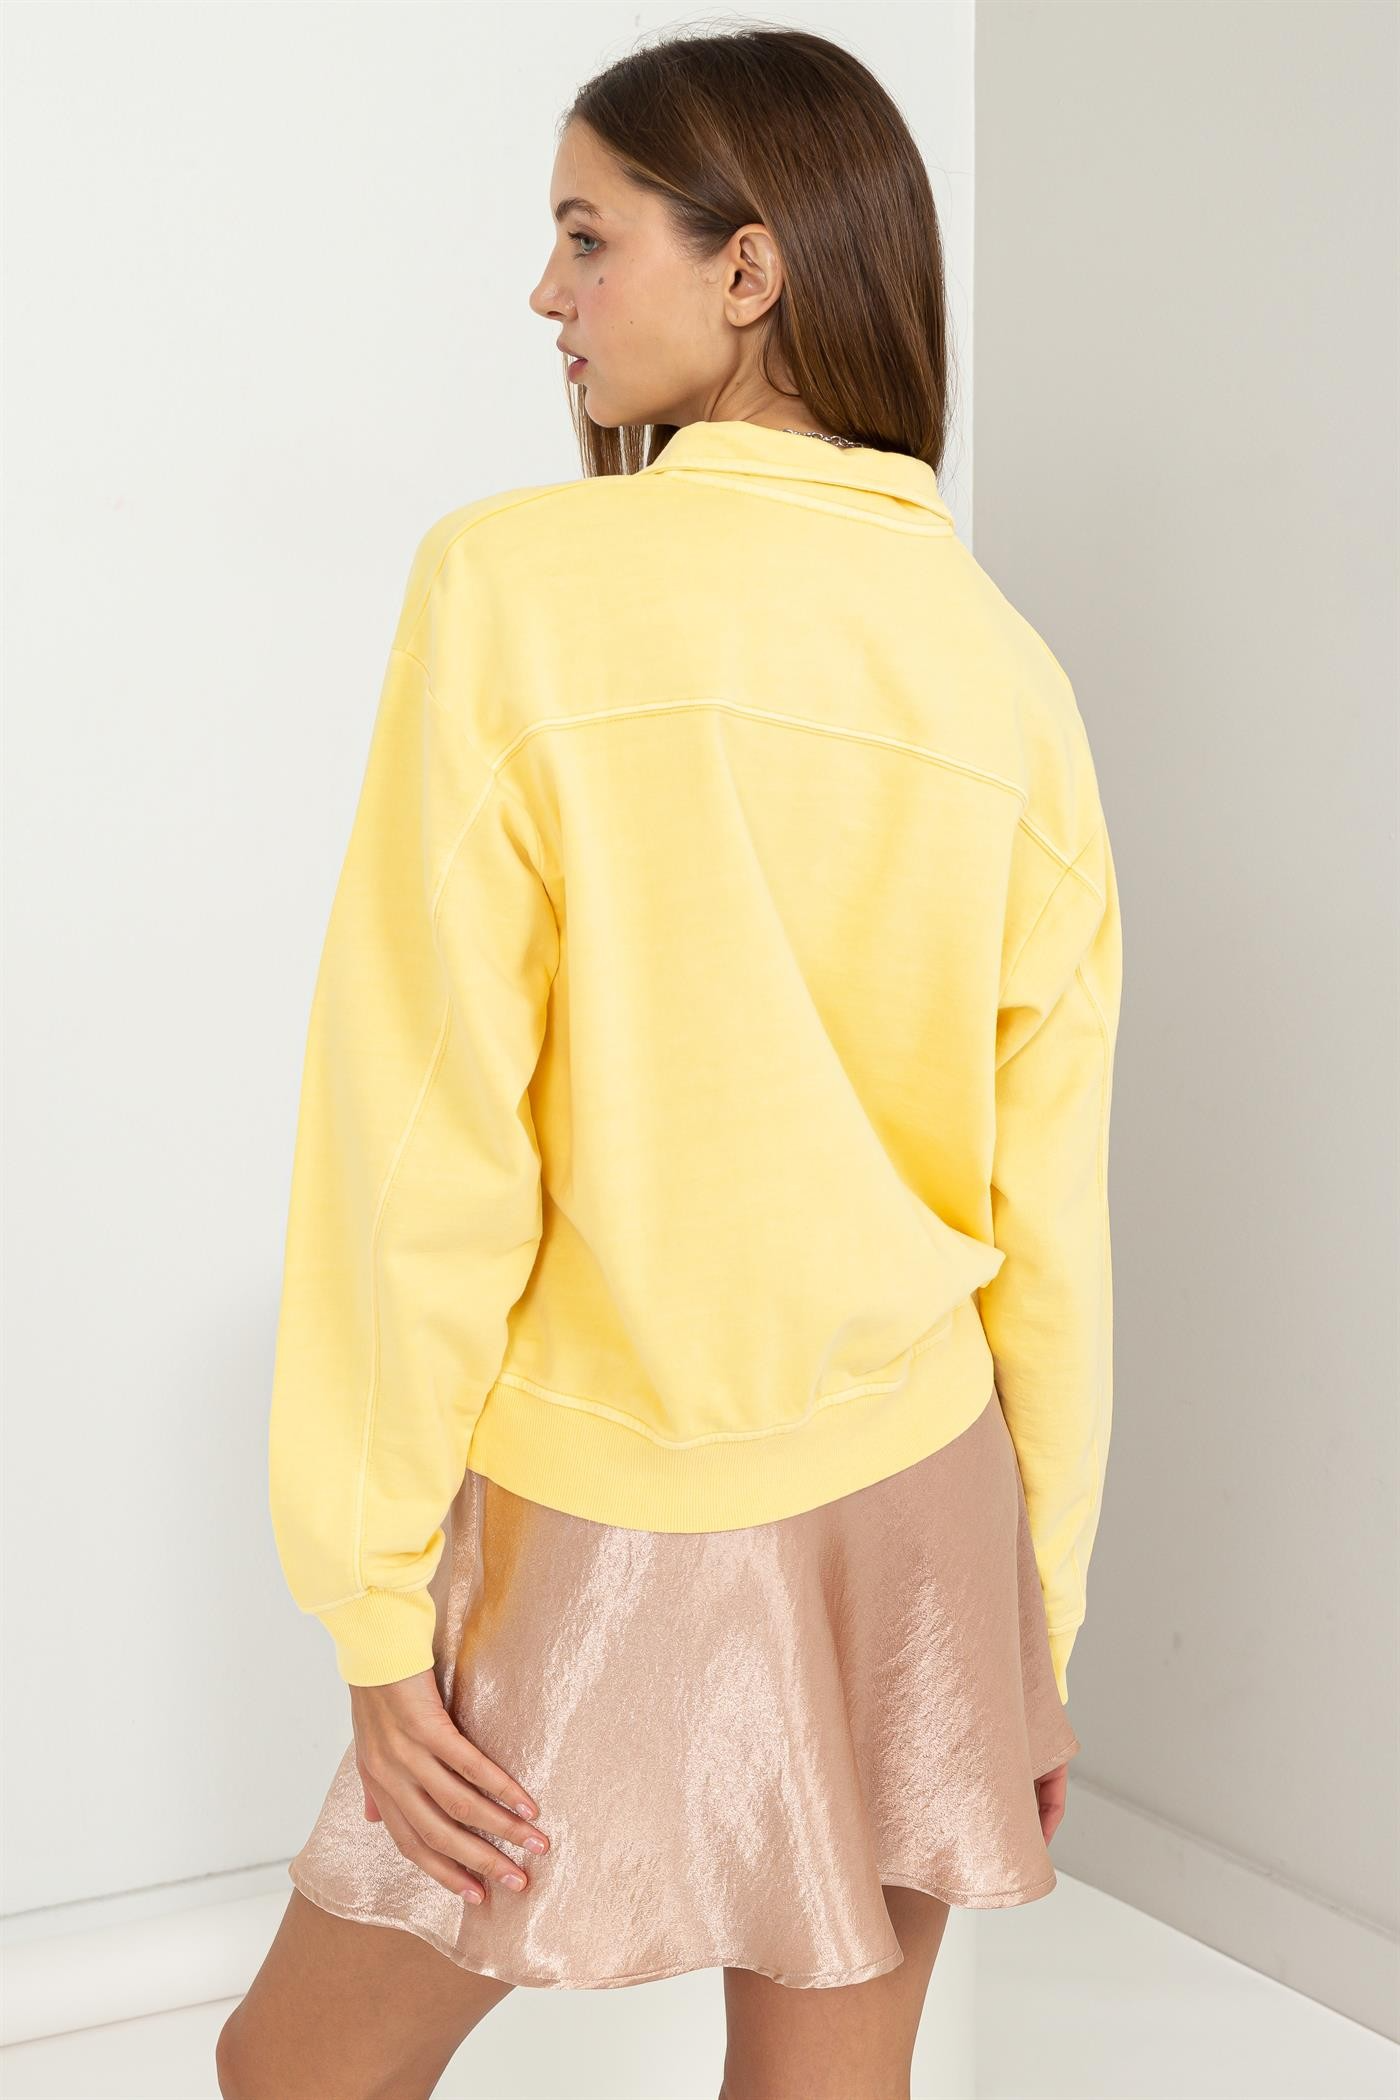 Playful Causal Cotton Pullover - Pineapple